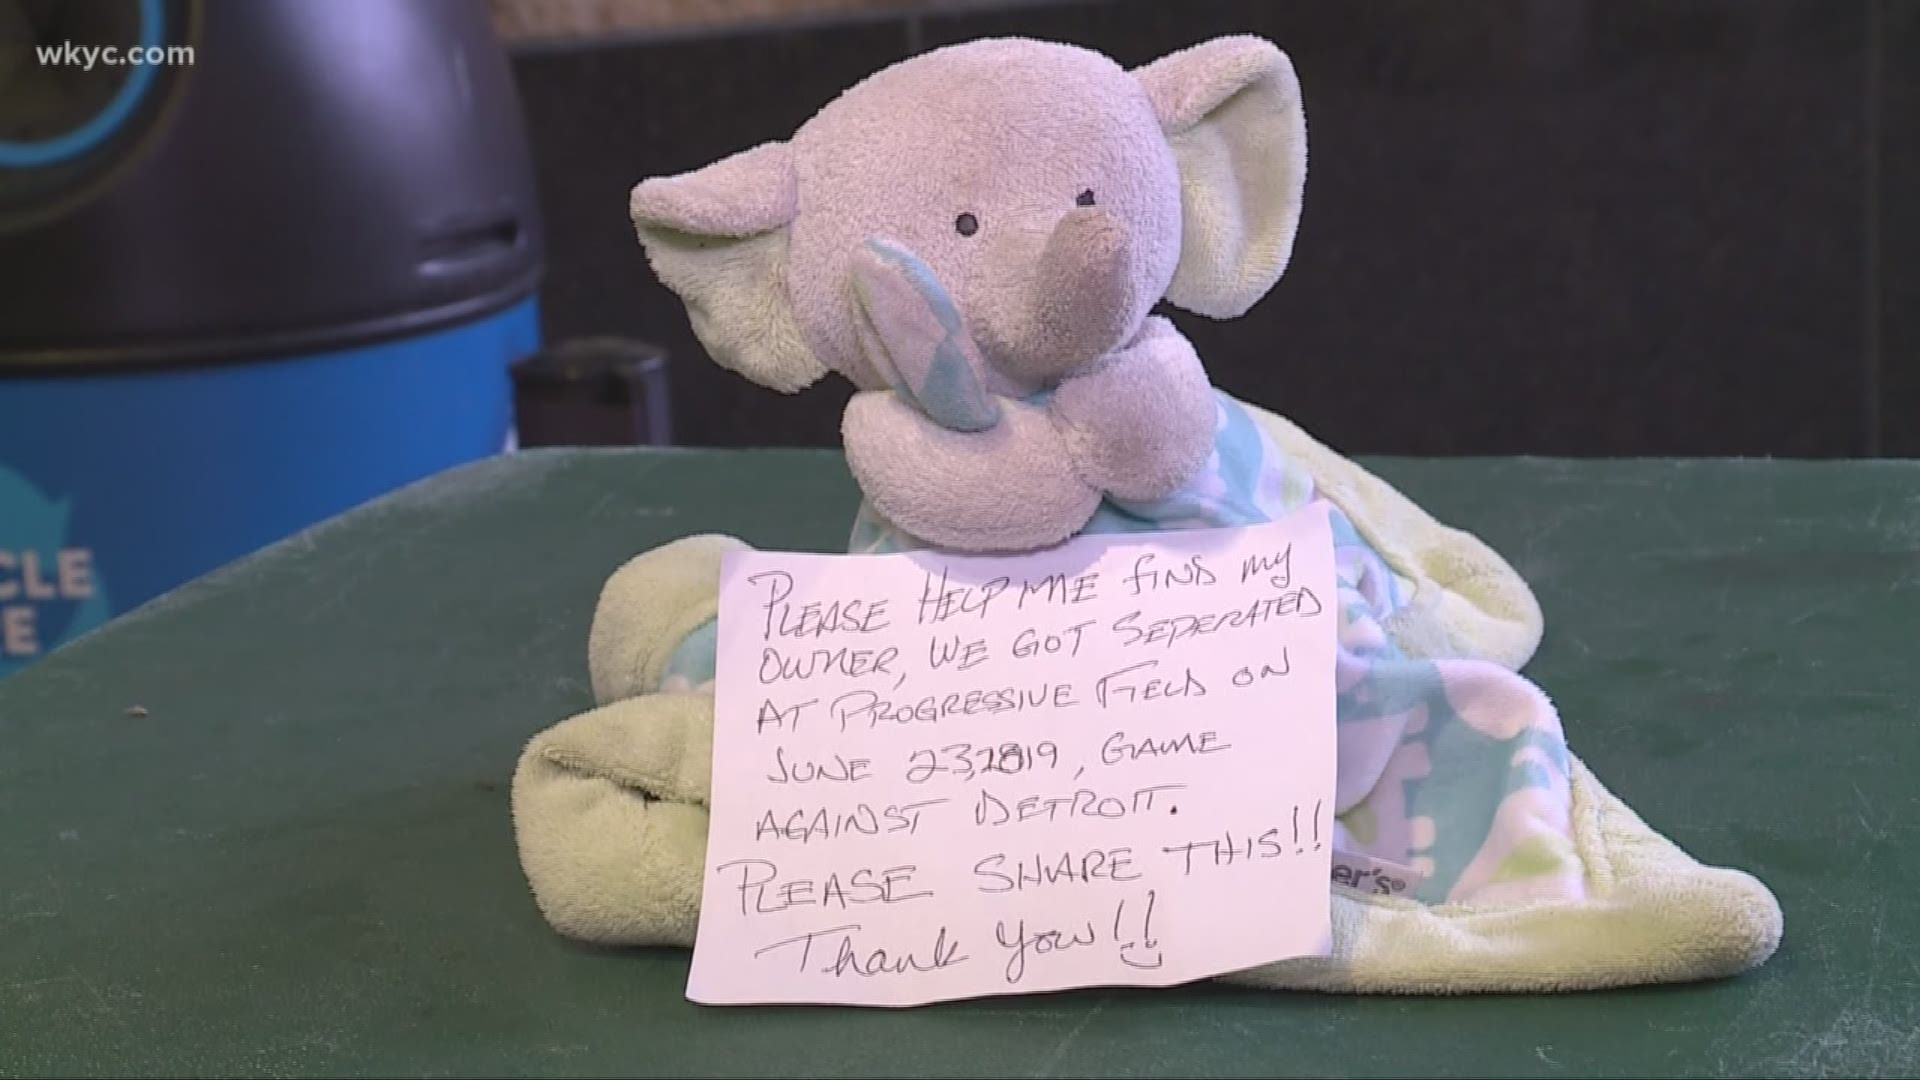 June 26, 2019: We have some great news! Woobie's owner has been found! The Cleveland Indians were on a mission to find the young fan who lost their stuffed elephant at the ballpark. Thankfully, they found the lost toy's owner! The saga started when Larry Scavnicky, concession supervisor at Tribe games, posted a photo on Facebook of a children's elephant stuffed animal holding a blanket he apparently found at Progressive Field following Sunday's game.